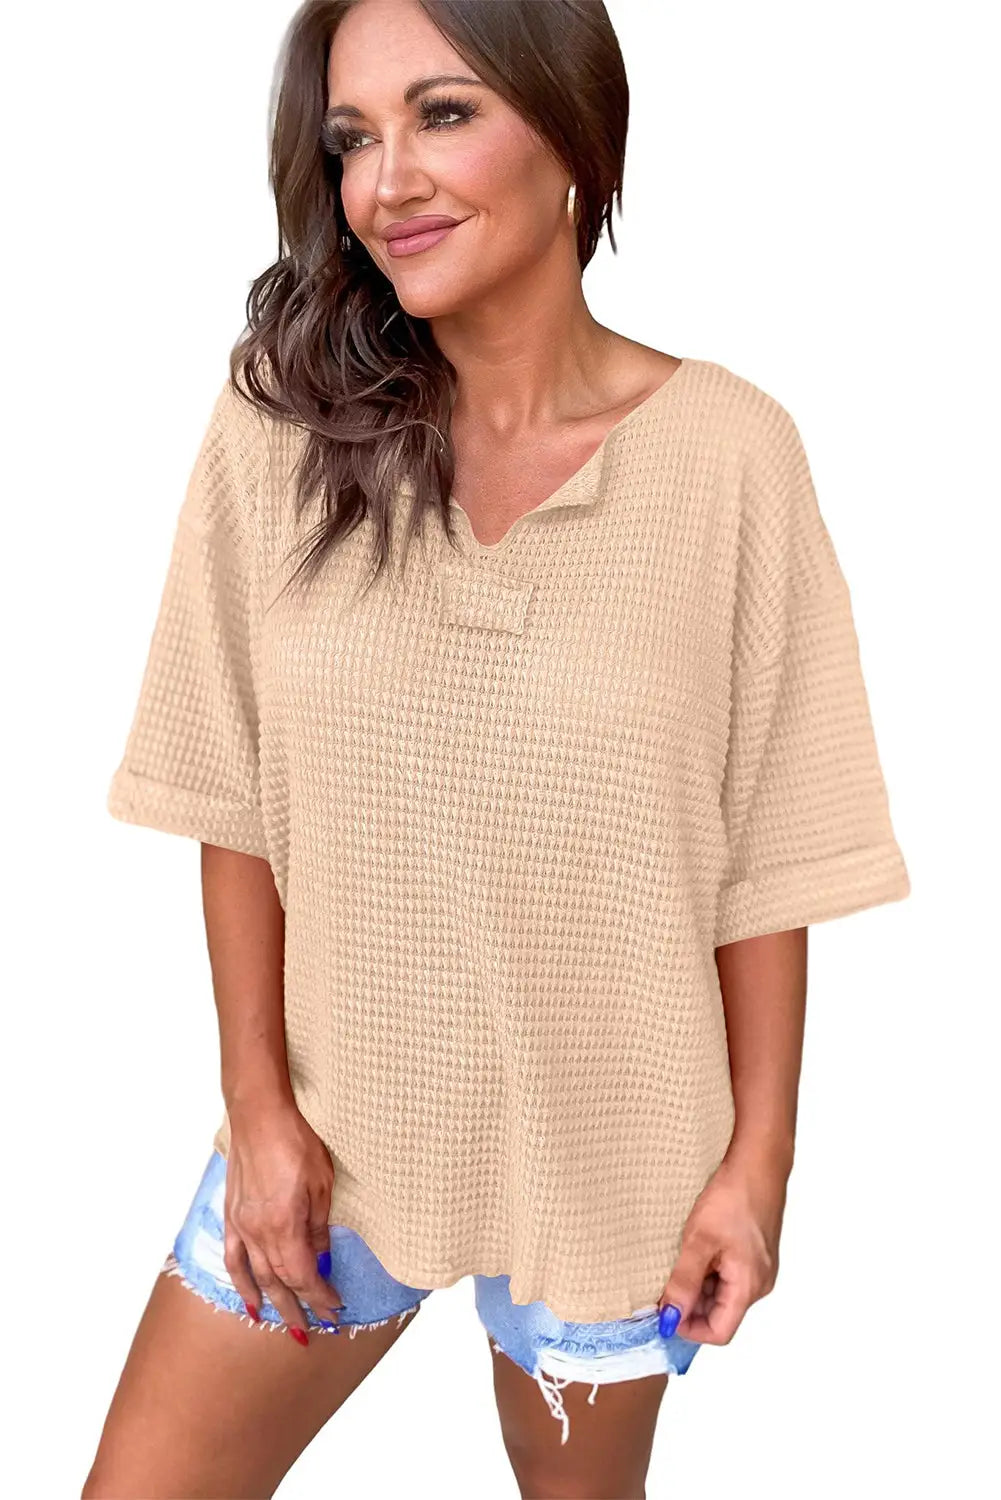 Parchment cuffed short sleeve top - tops/tops & tees